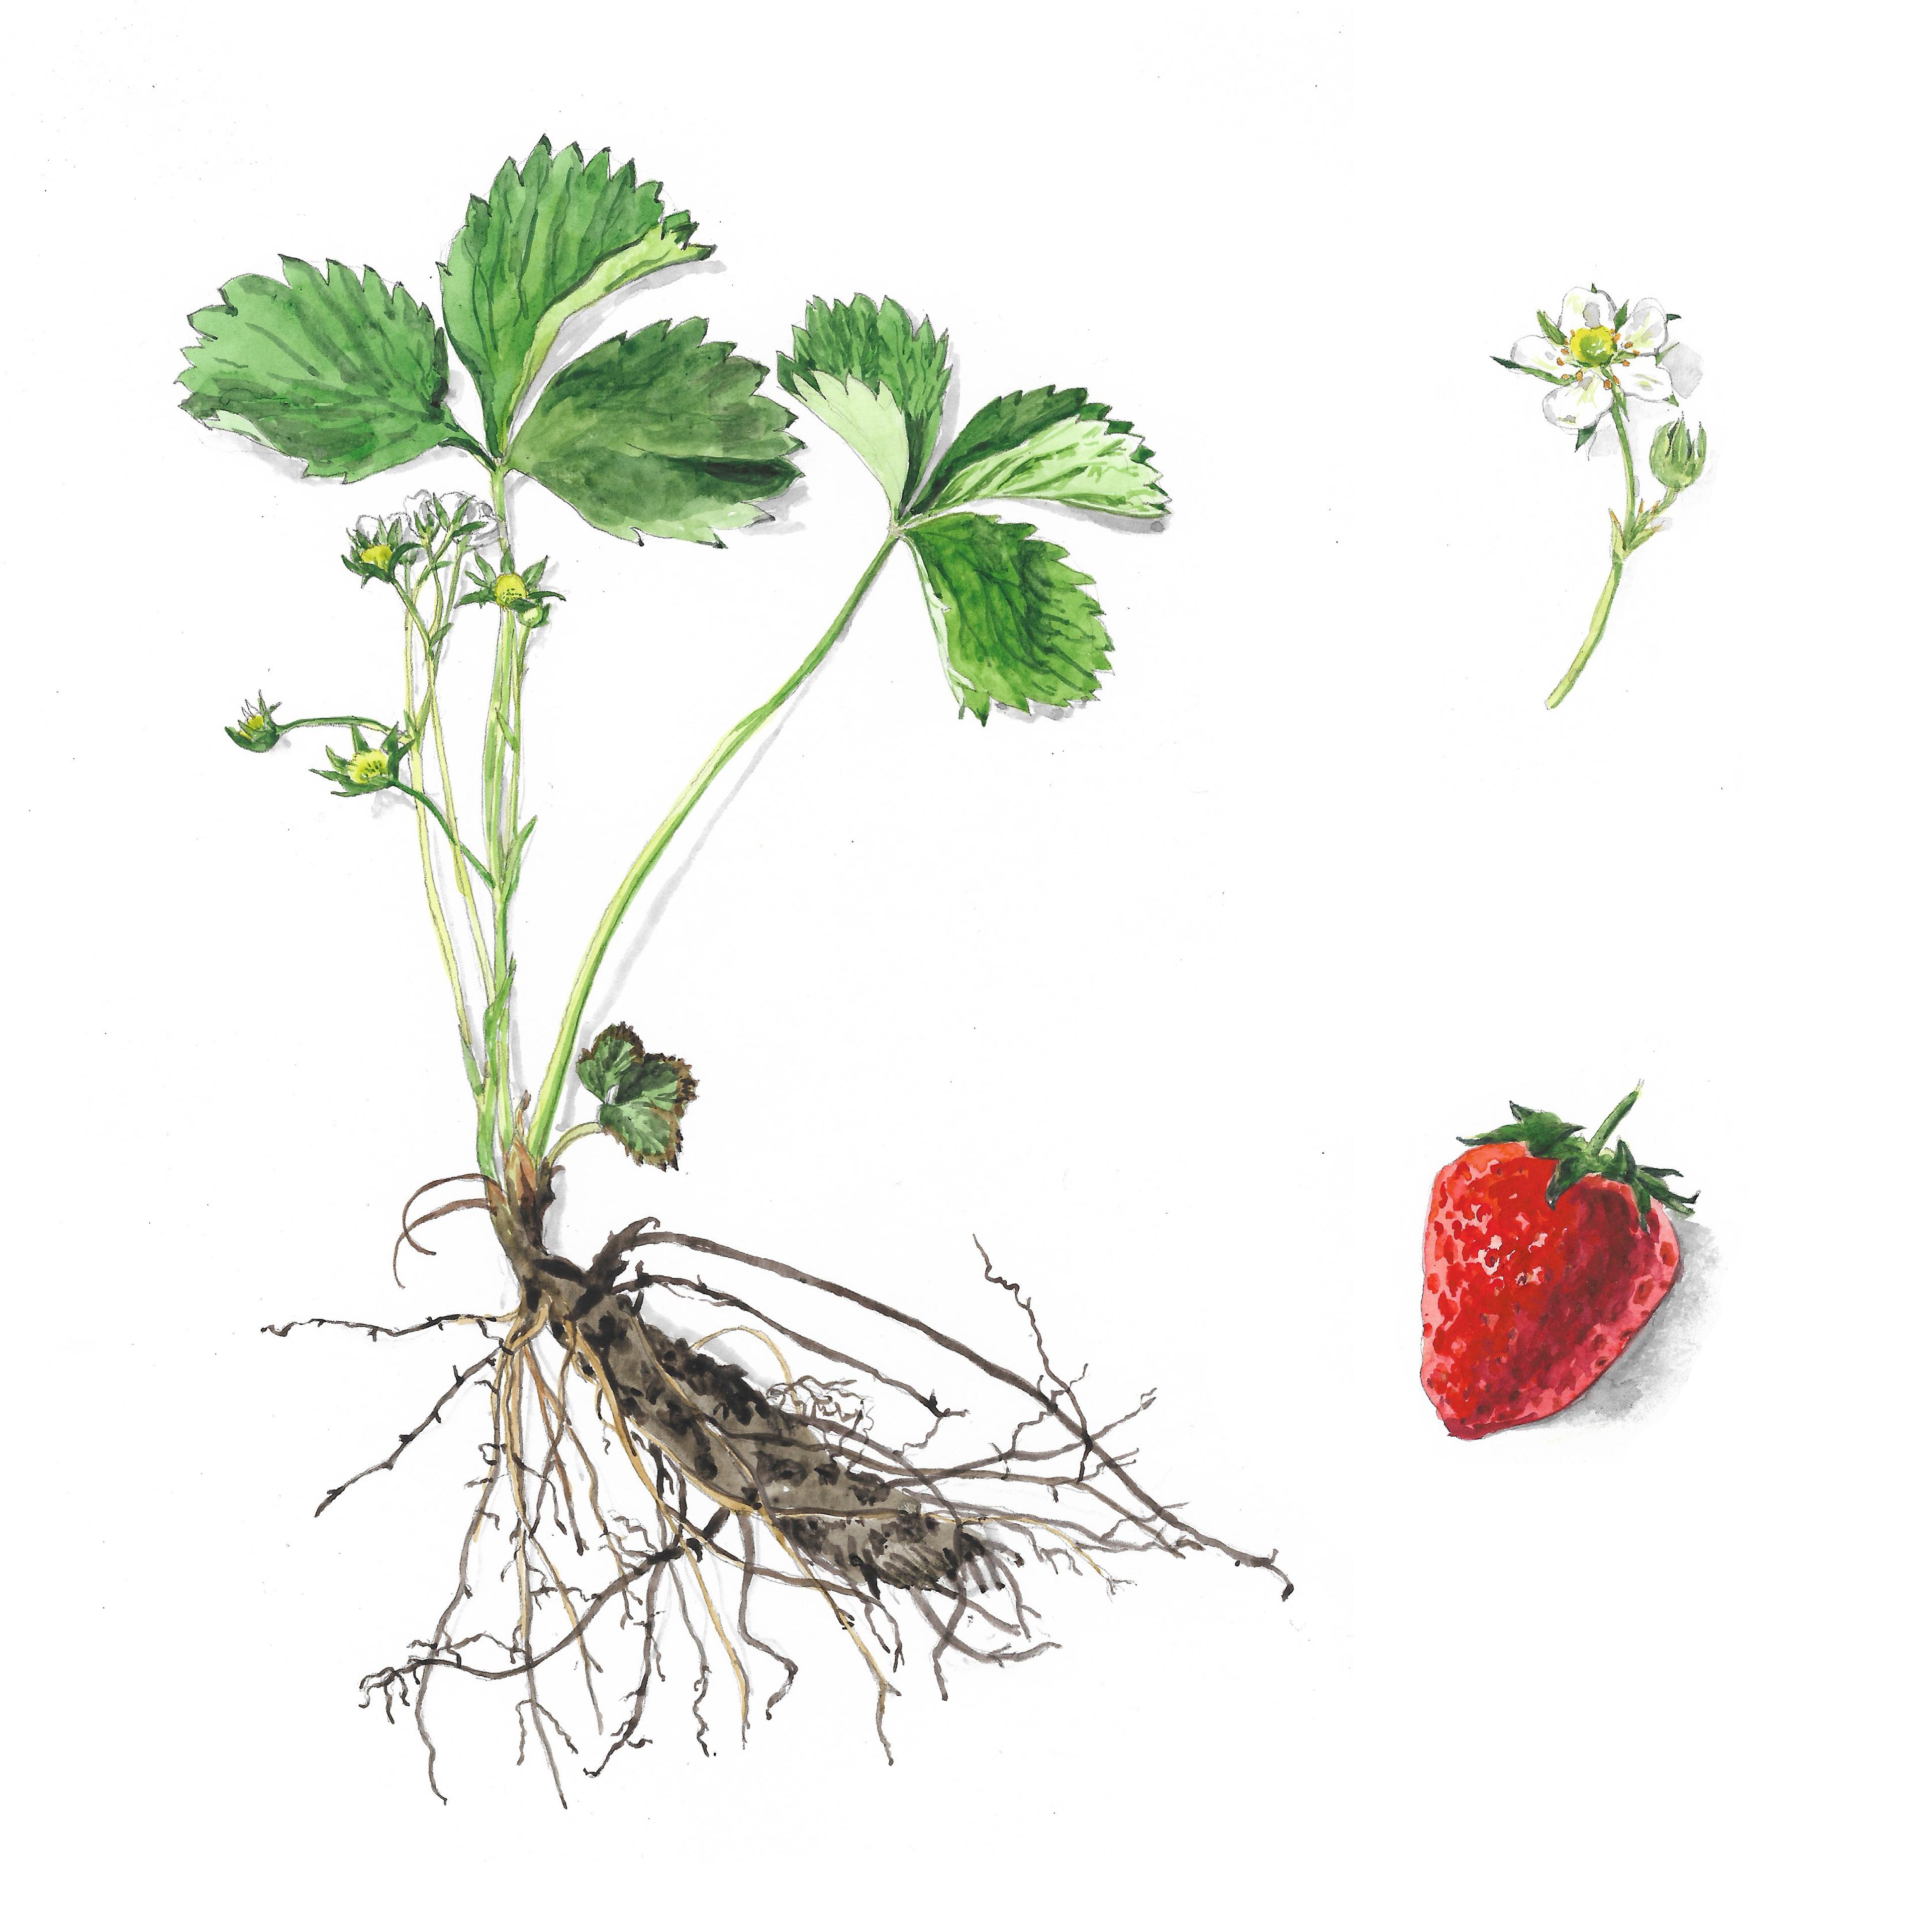 Watercolour illustration of a plant with its roots, along with a strawberry